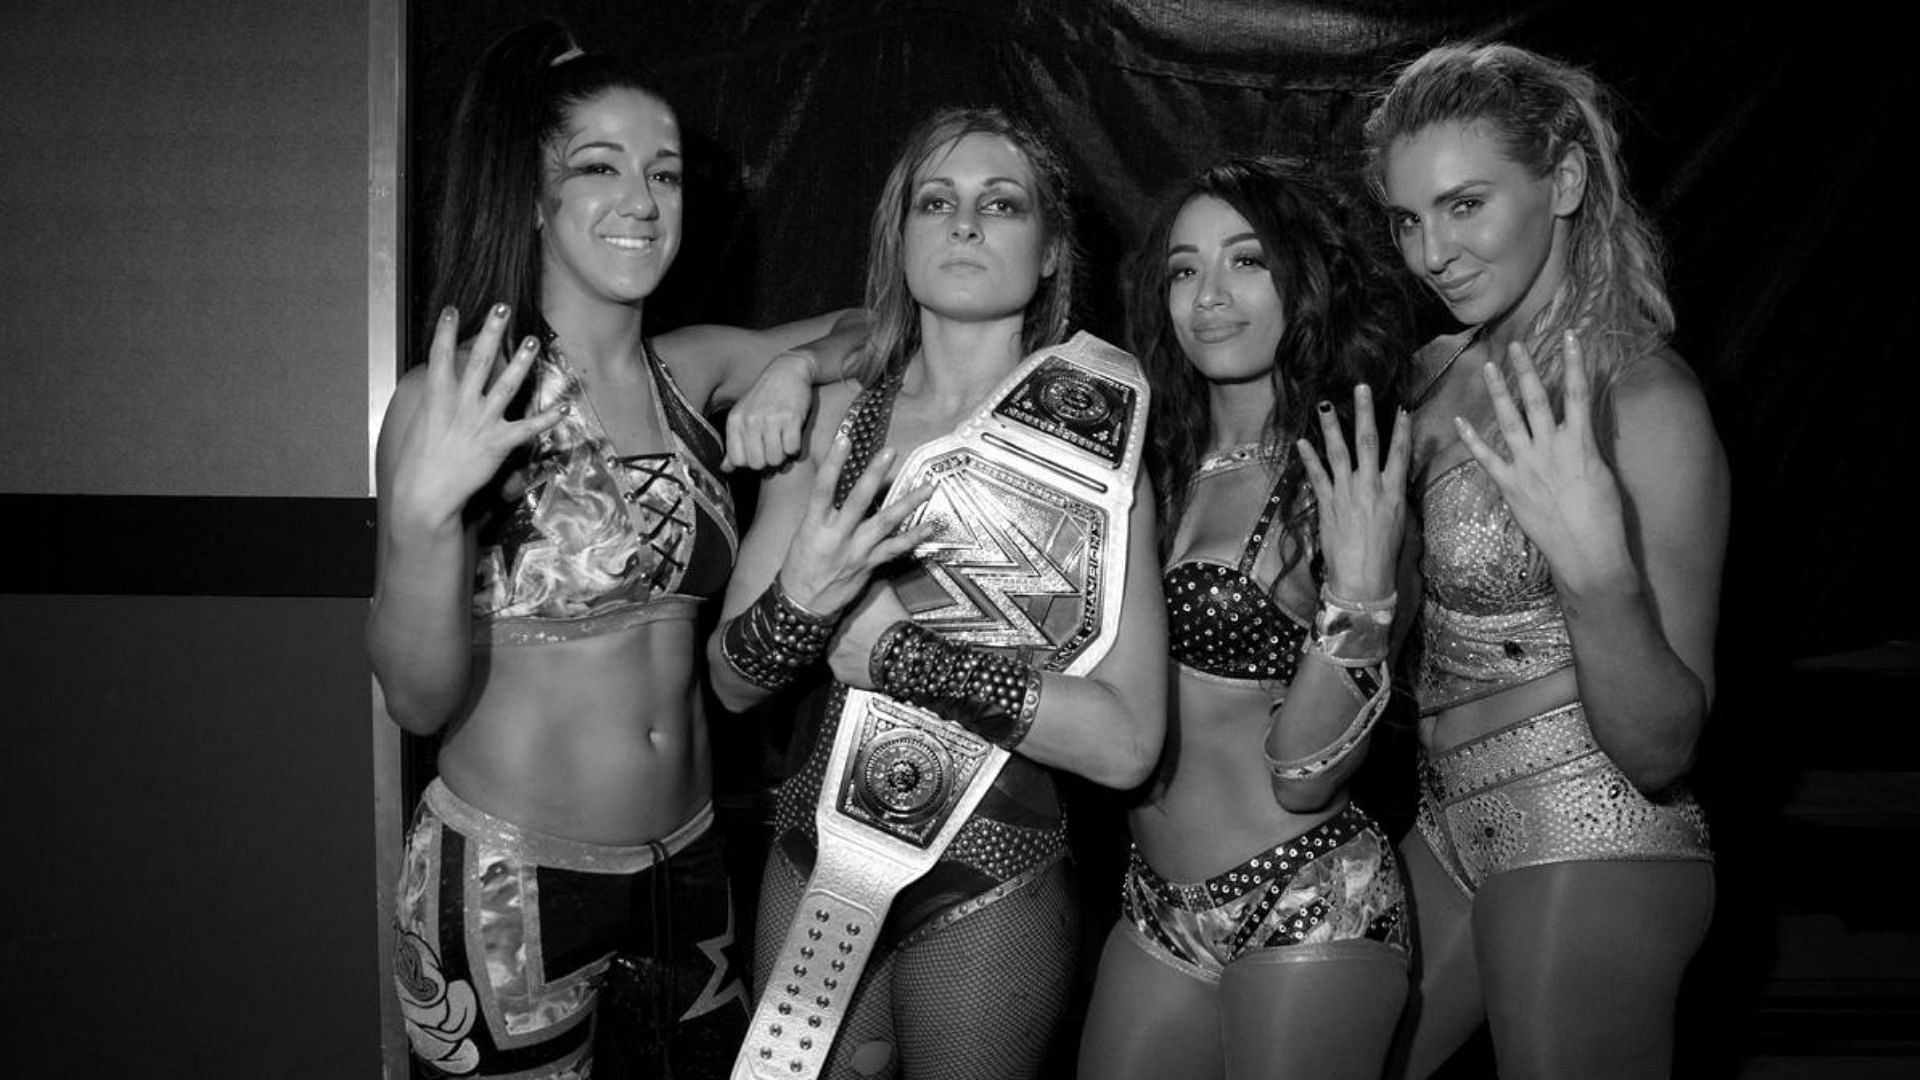 The Four Horsewomen of WWE were created in NXT!